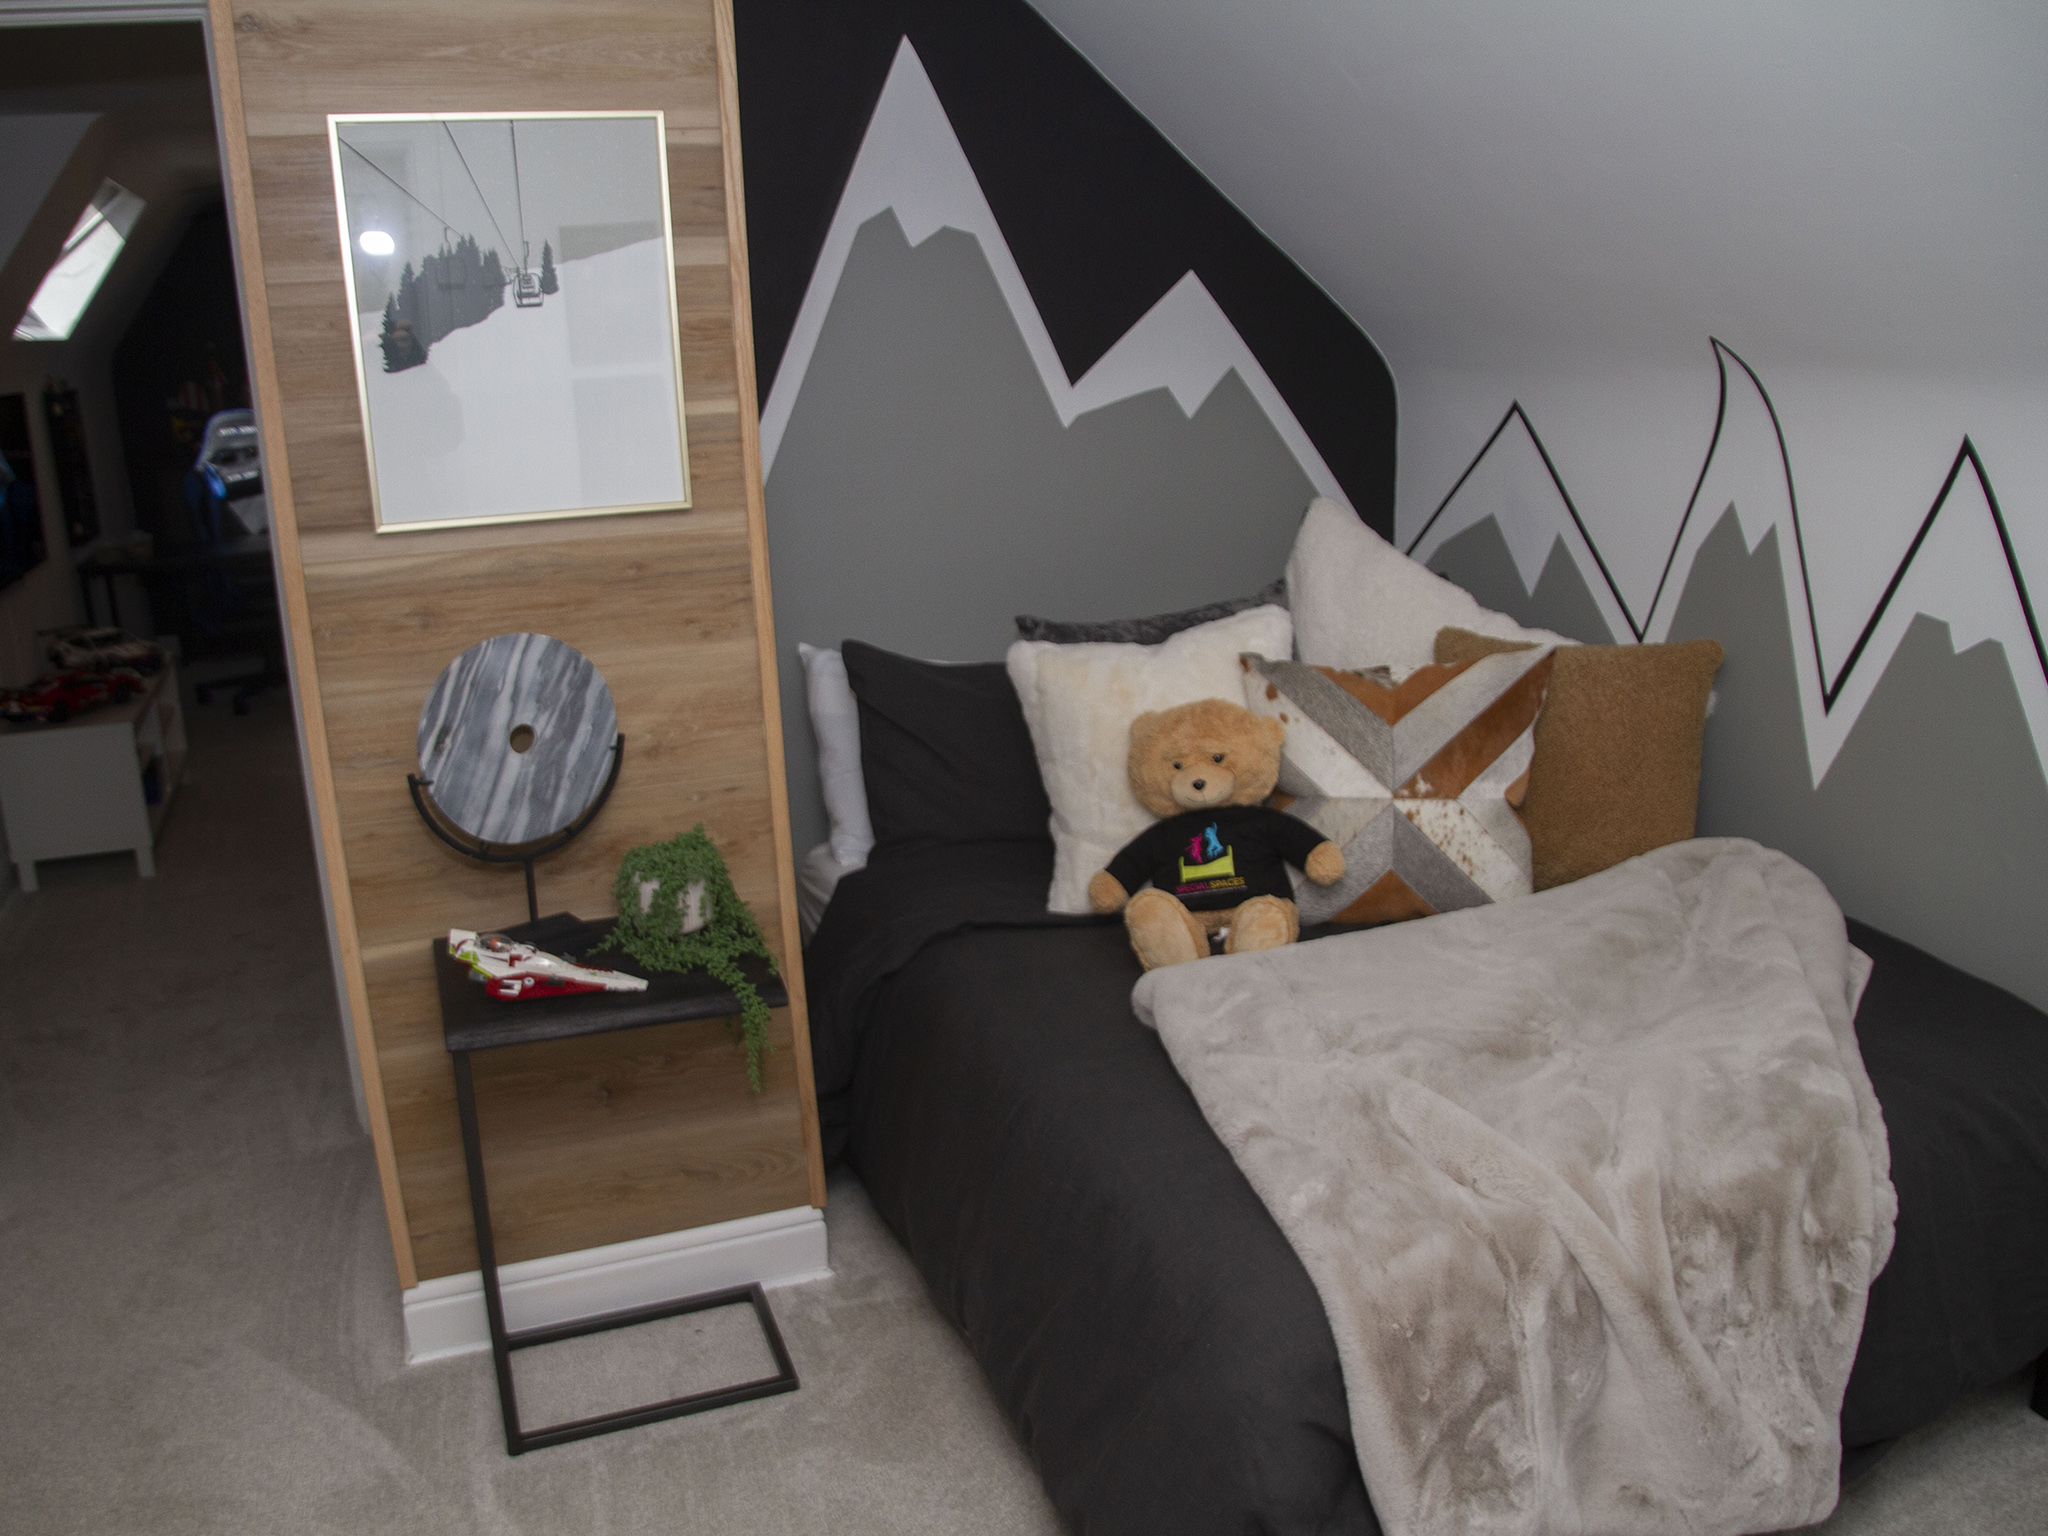 Rudy’s sleek and modern bedroom, created by volunteers from Northwestern Mutual and Special Spaces